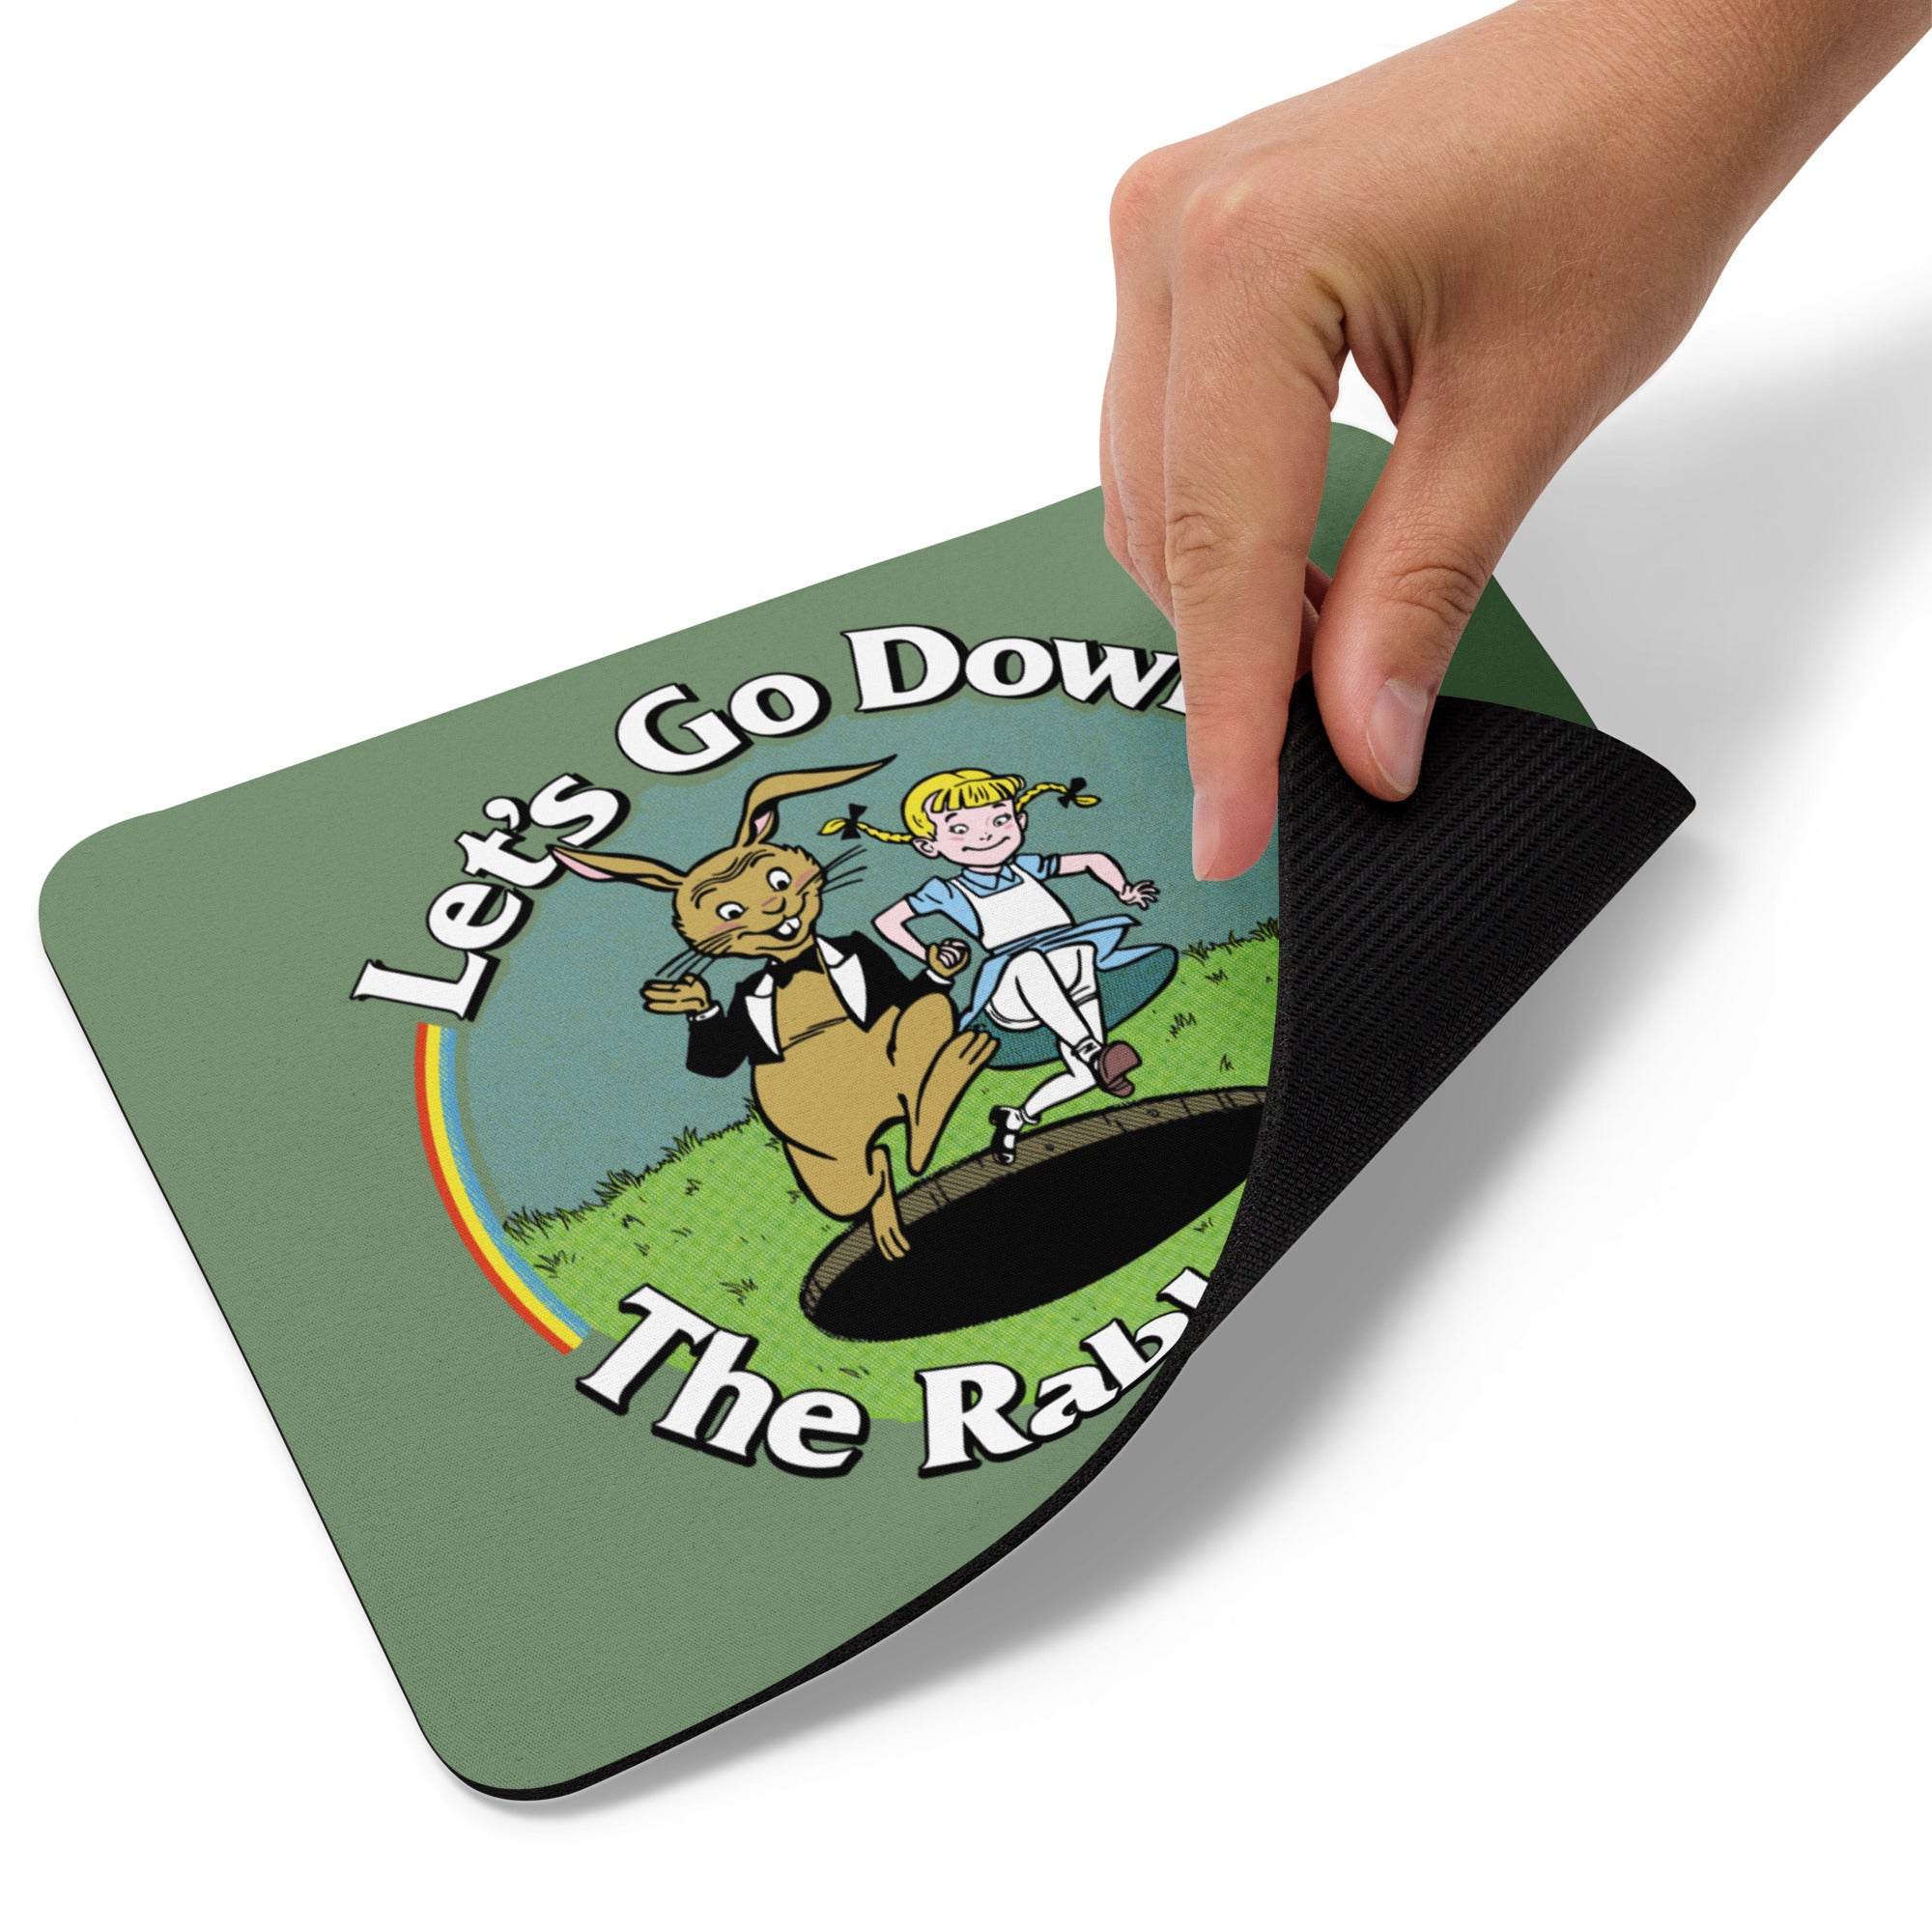 Let's Go Down the Rabbit Hole Mouse pad